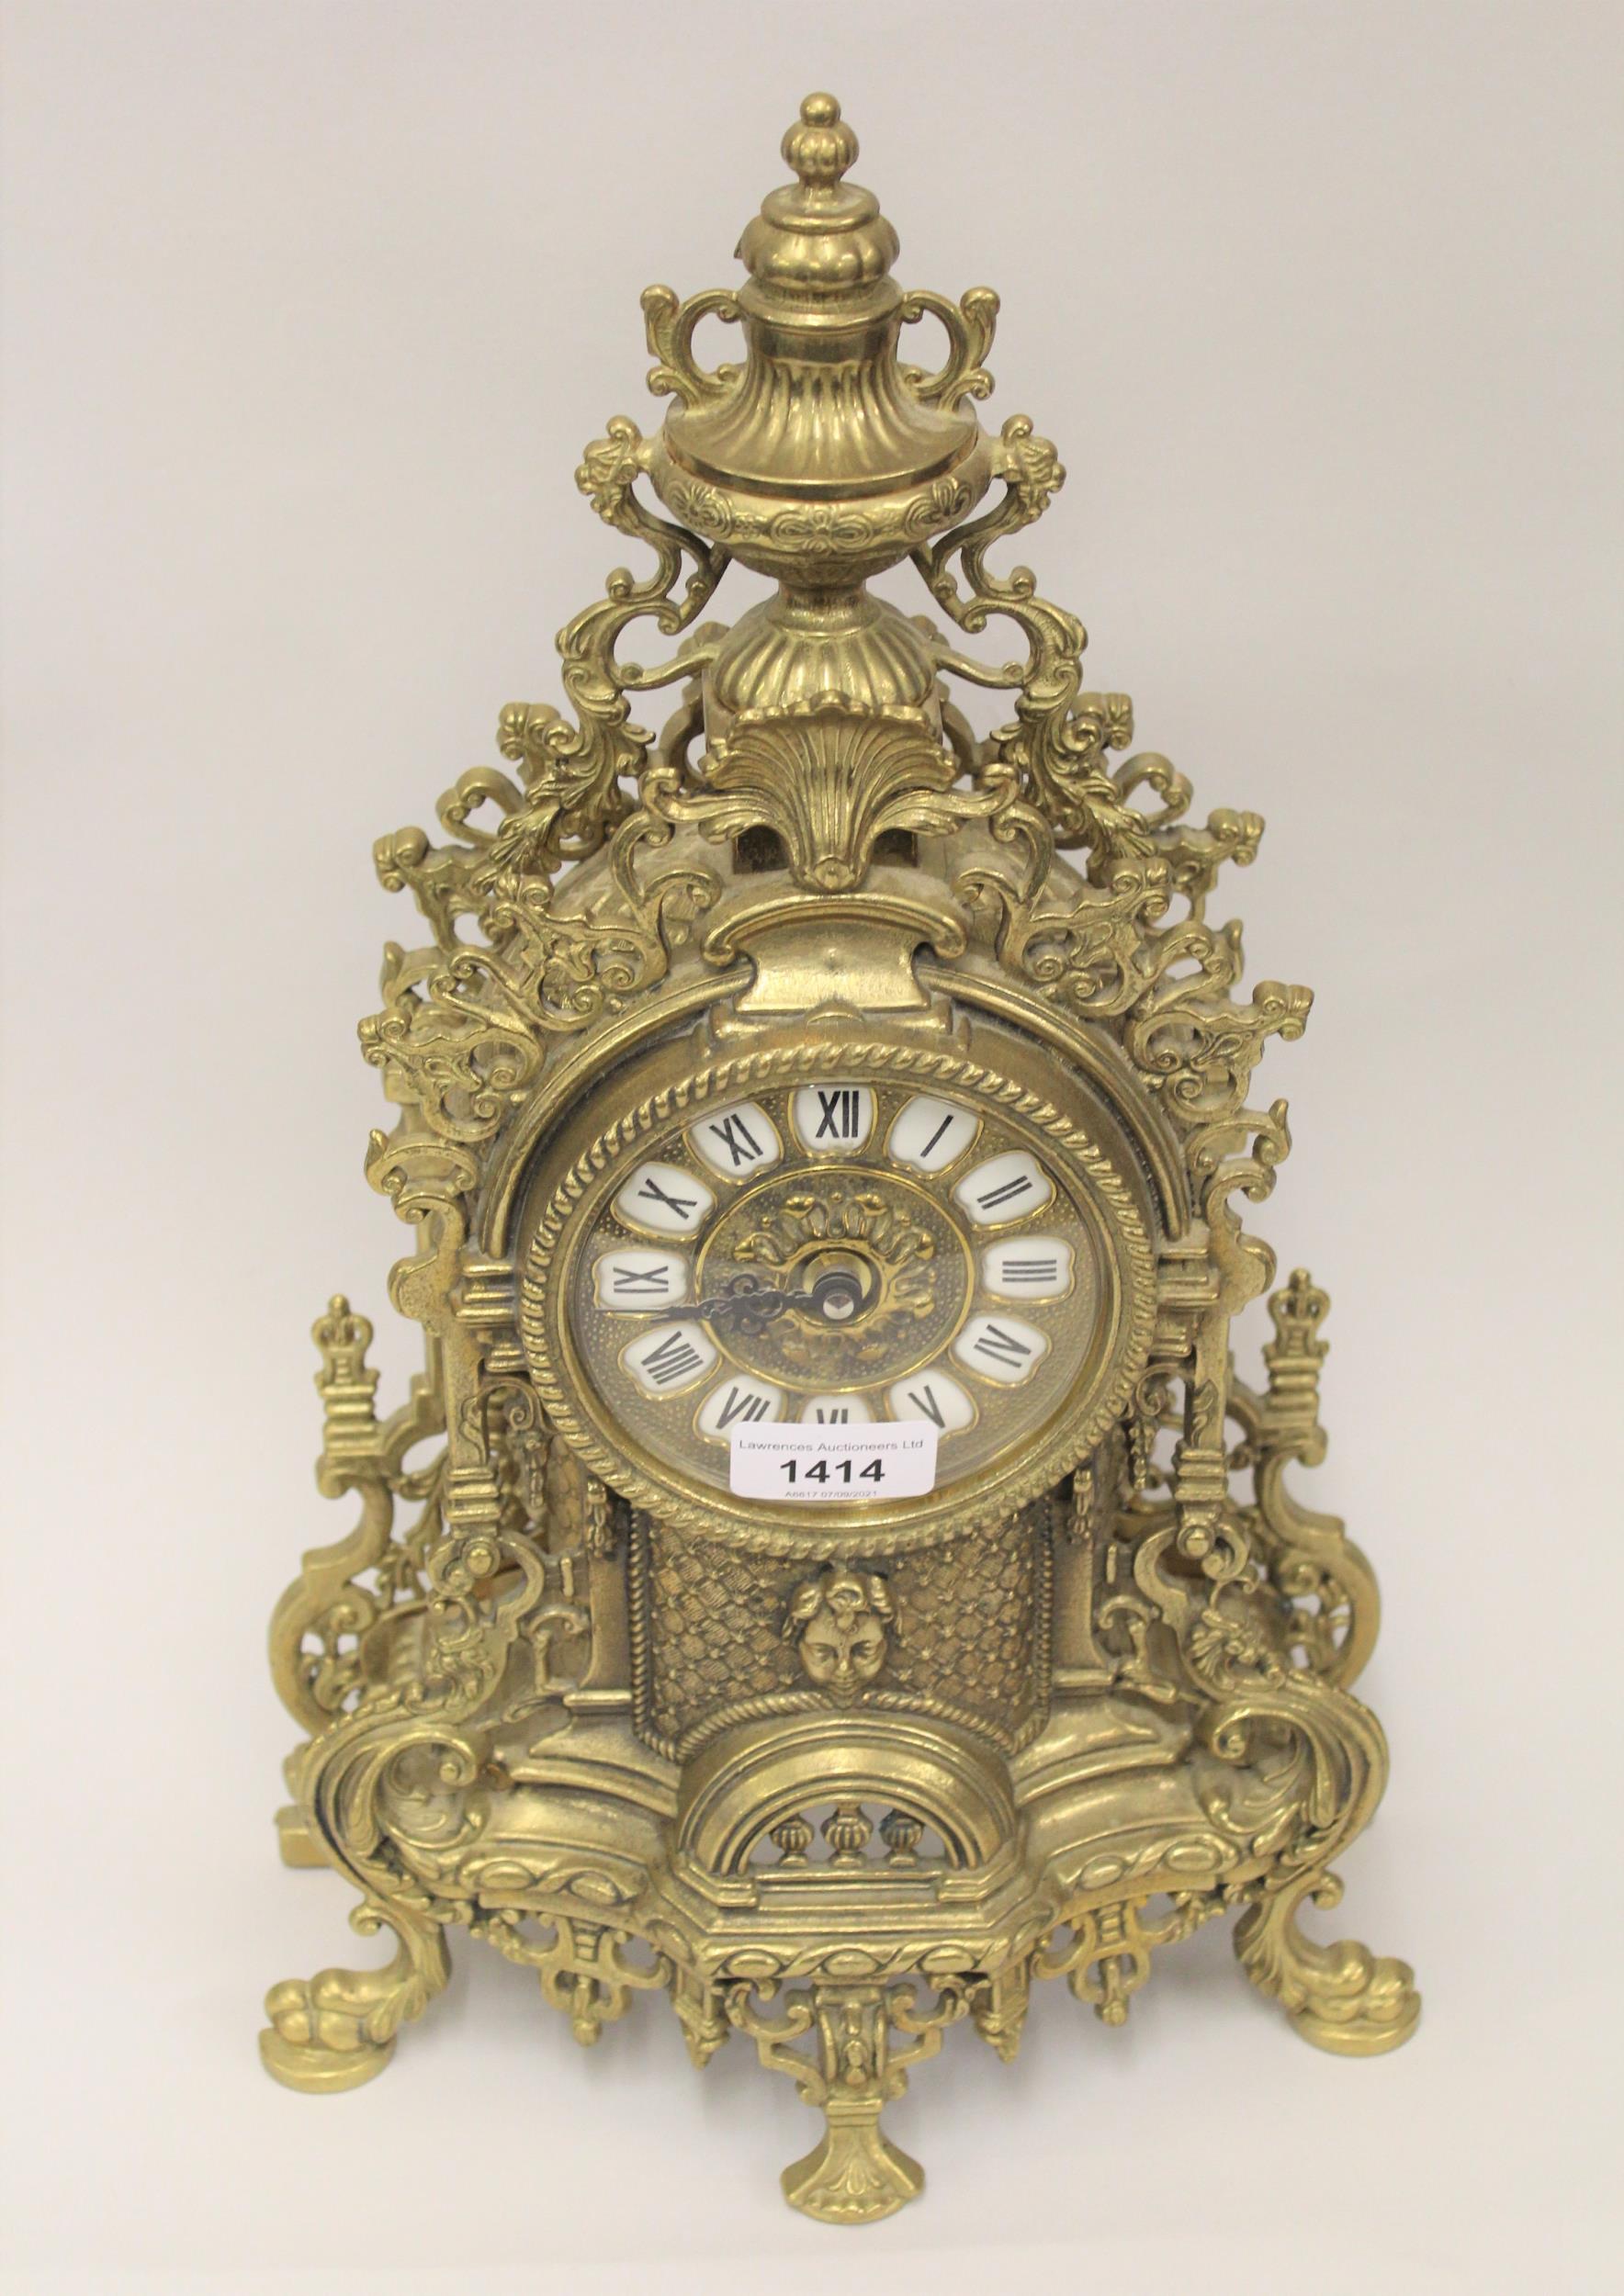 Reproduction gilt brass ornate mantel clock with battery movement